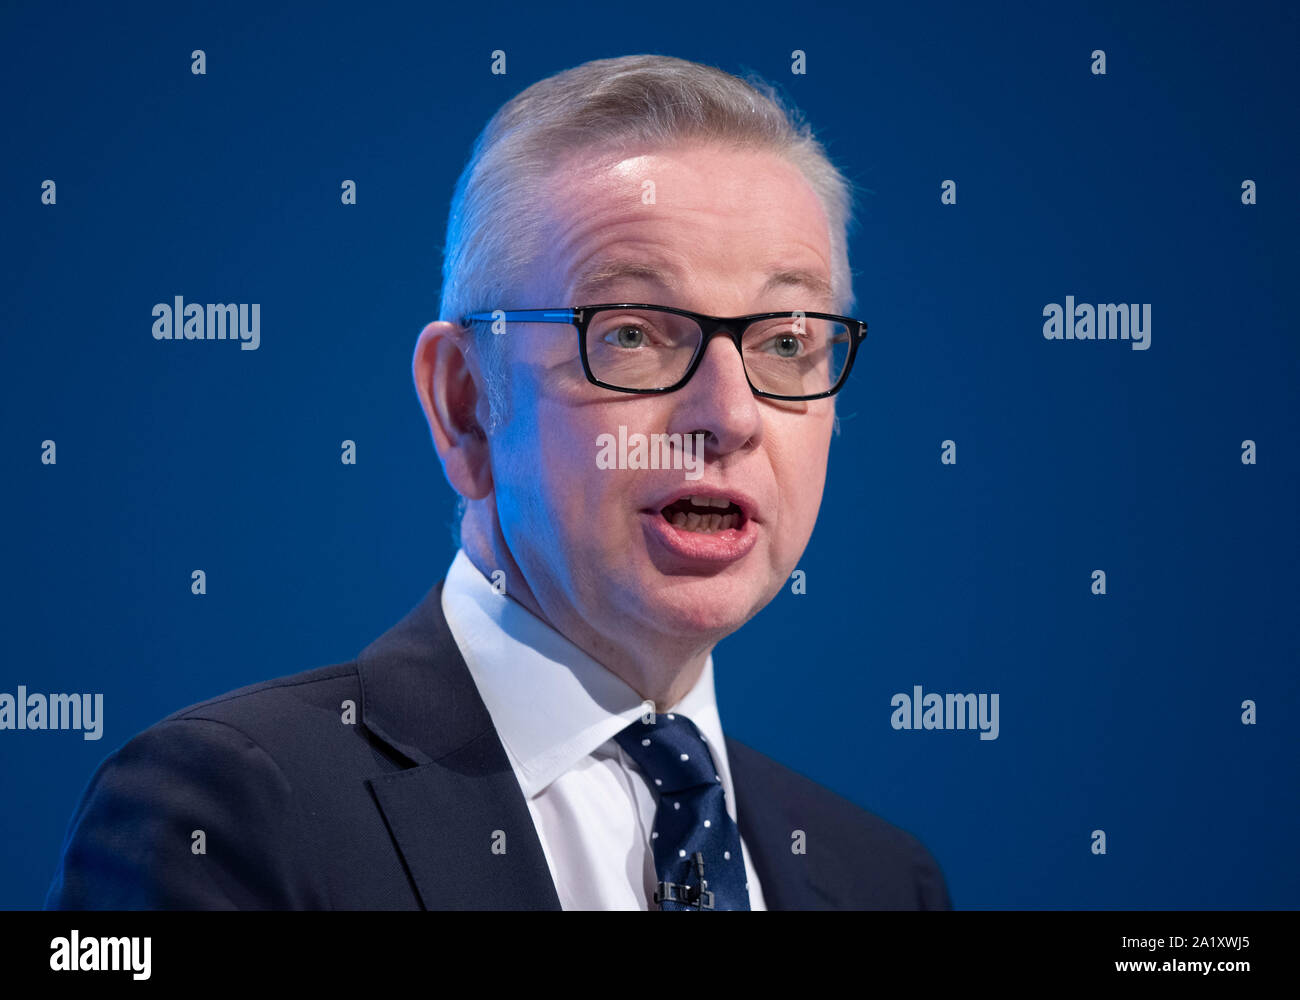 Manchester, UK. 29th September 2019. Michael Gove, Chancellor of the Duchy of Lancaster and MP for Surrey Heath speaks at day one of the Conservative Party Conference in Manchester. © Russell Hart/Alamy Live News. Stock Photo